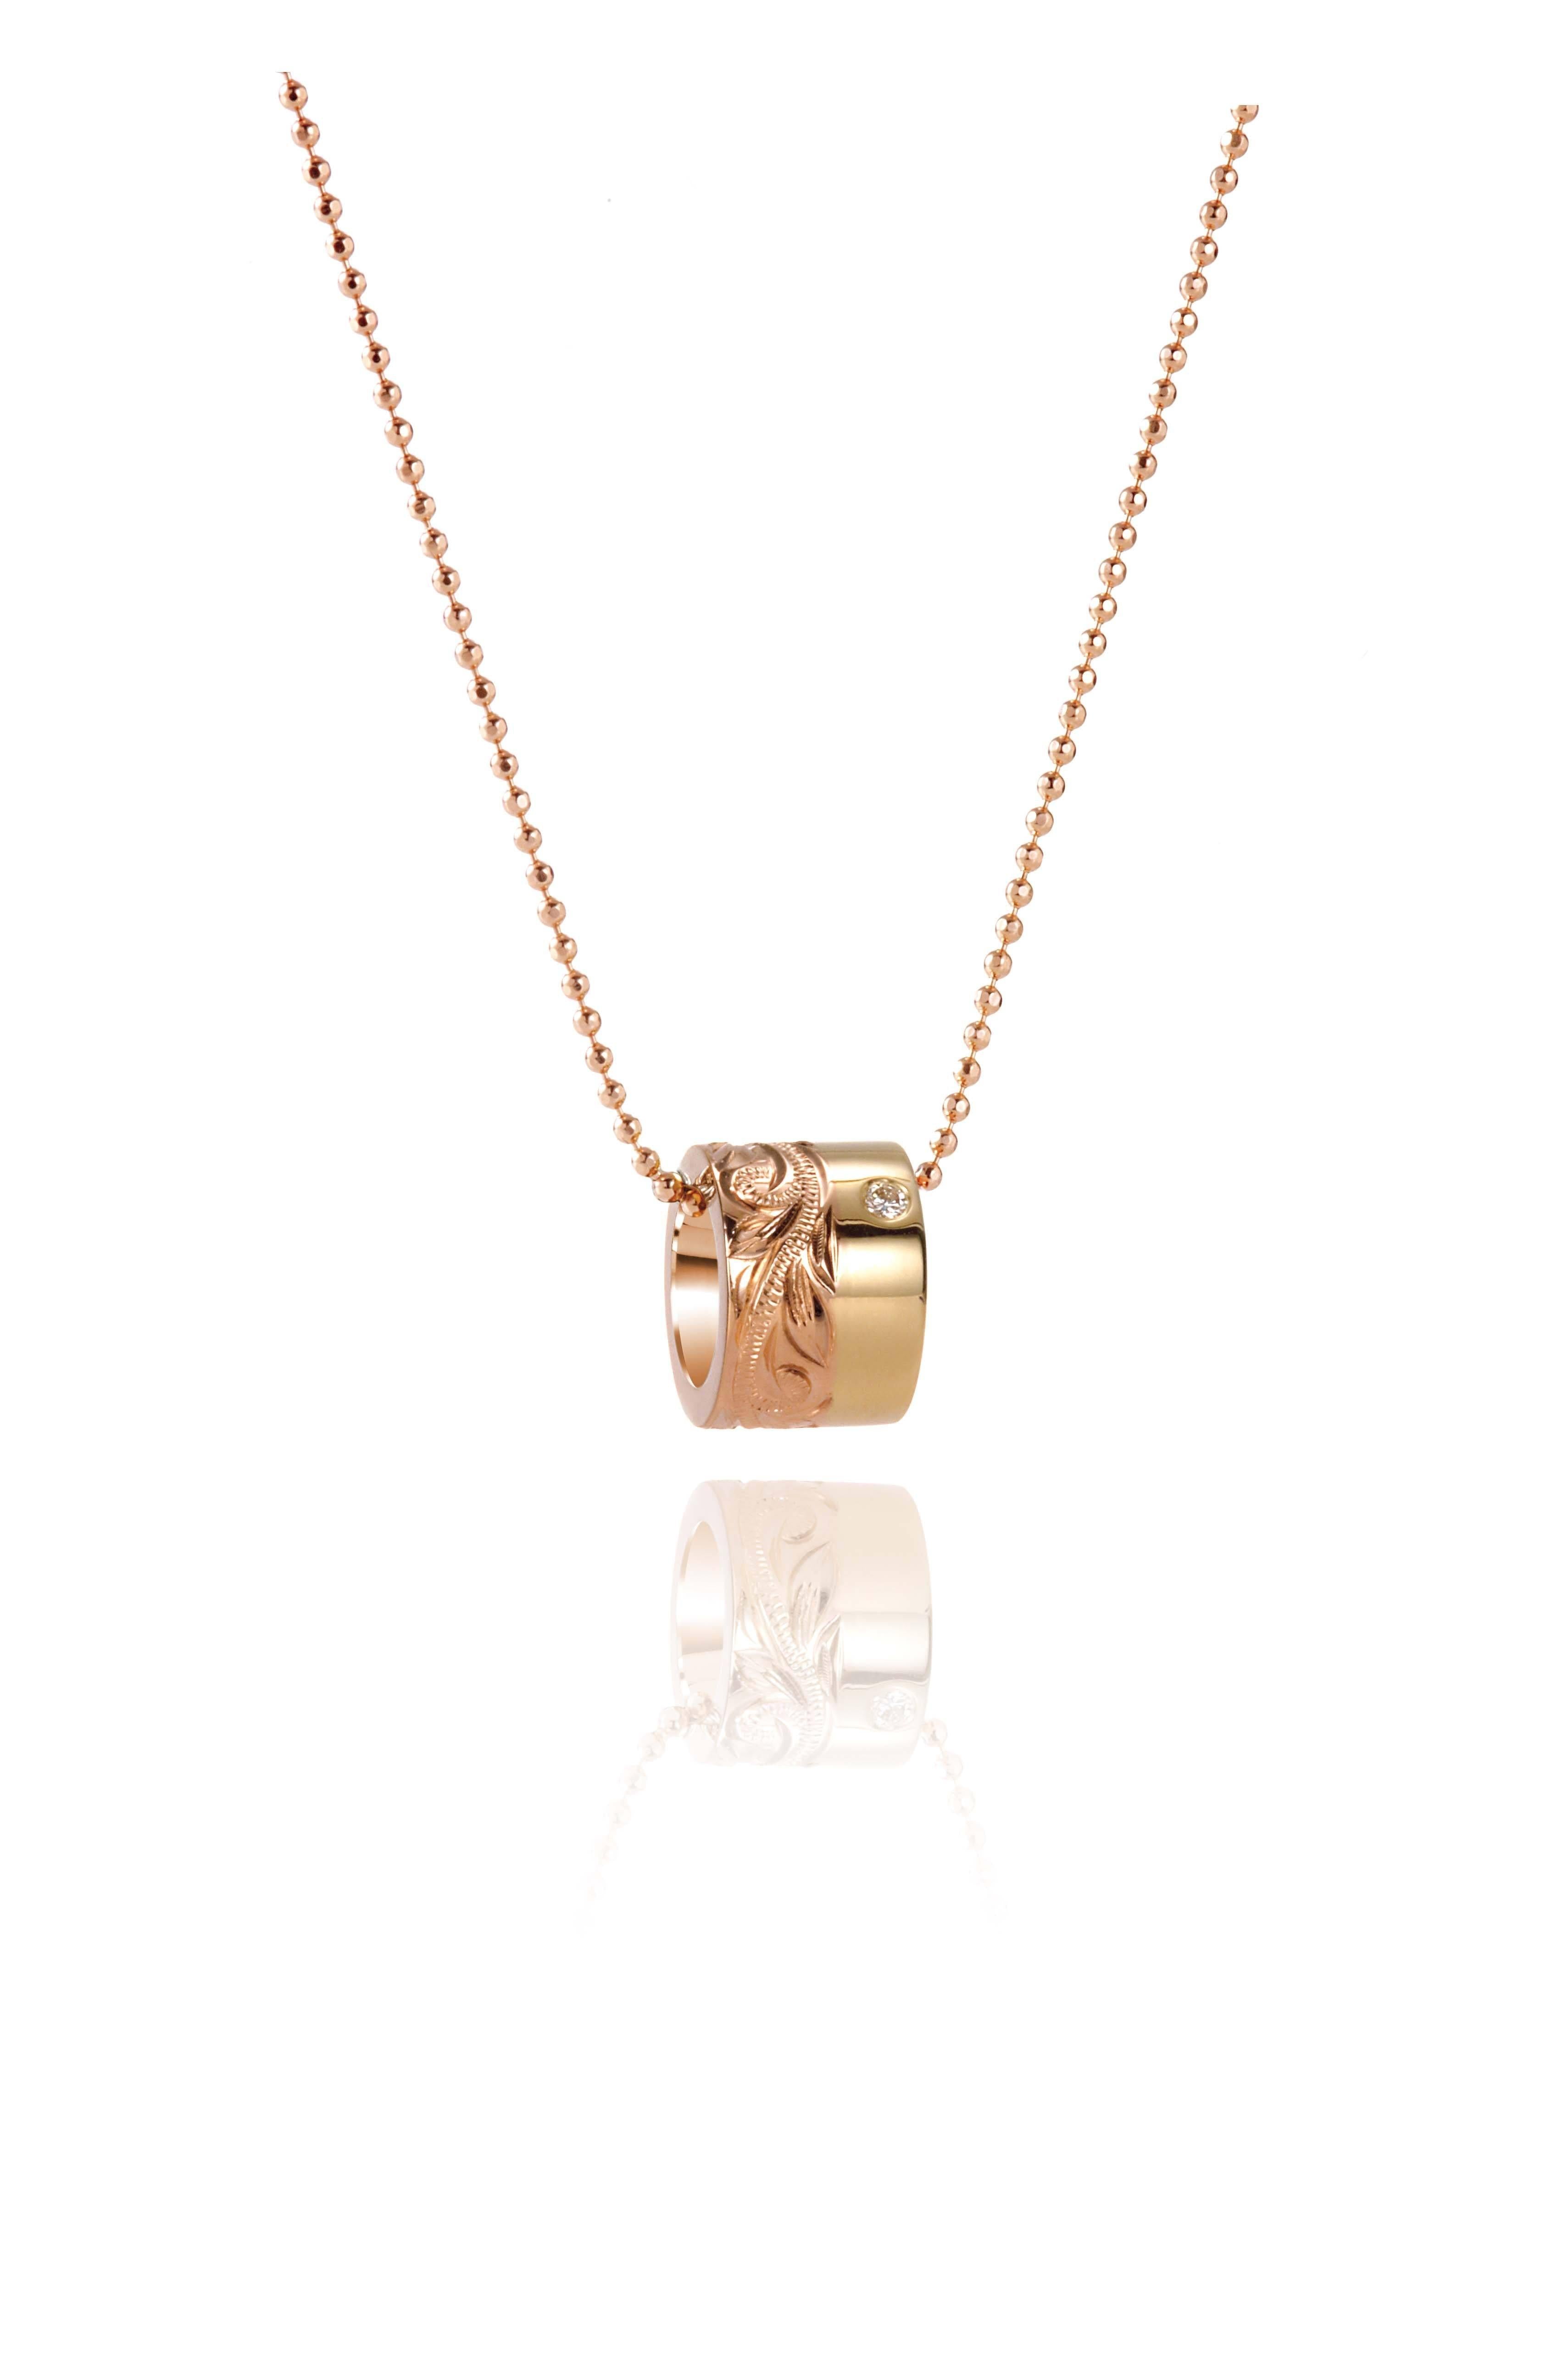 This picture shows a 14k yellow and rose gold two-tone barrel pendant with hand engravings and a diamond.